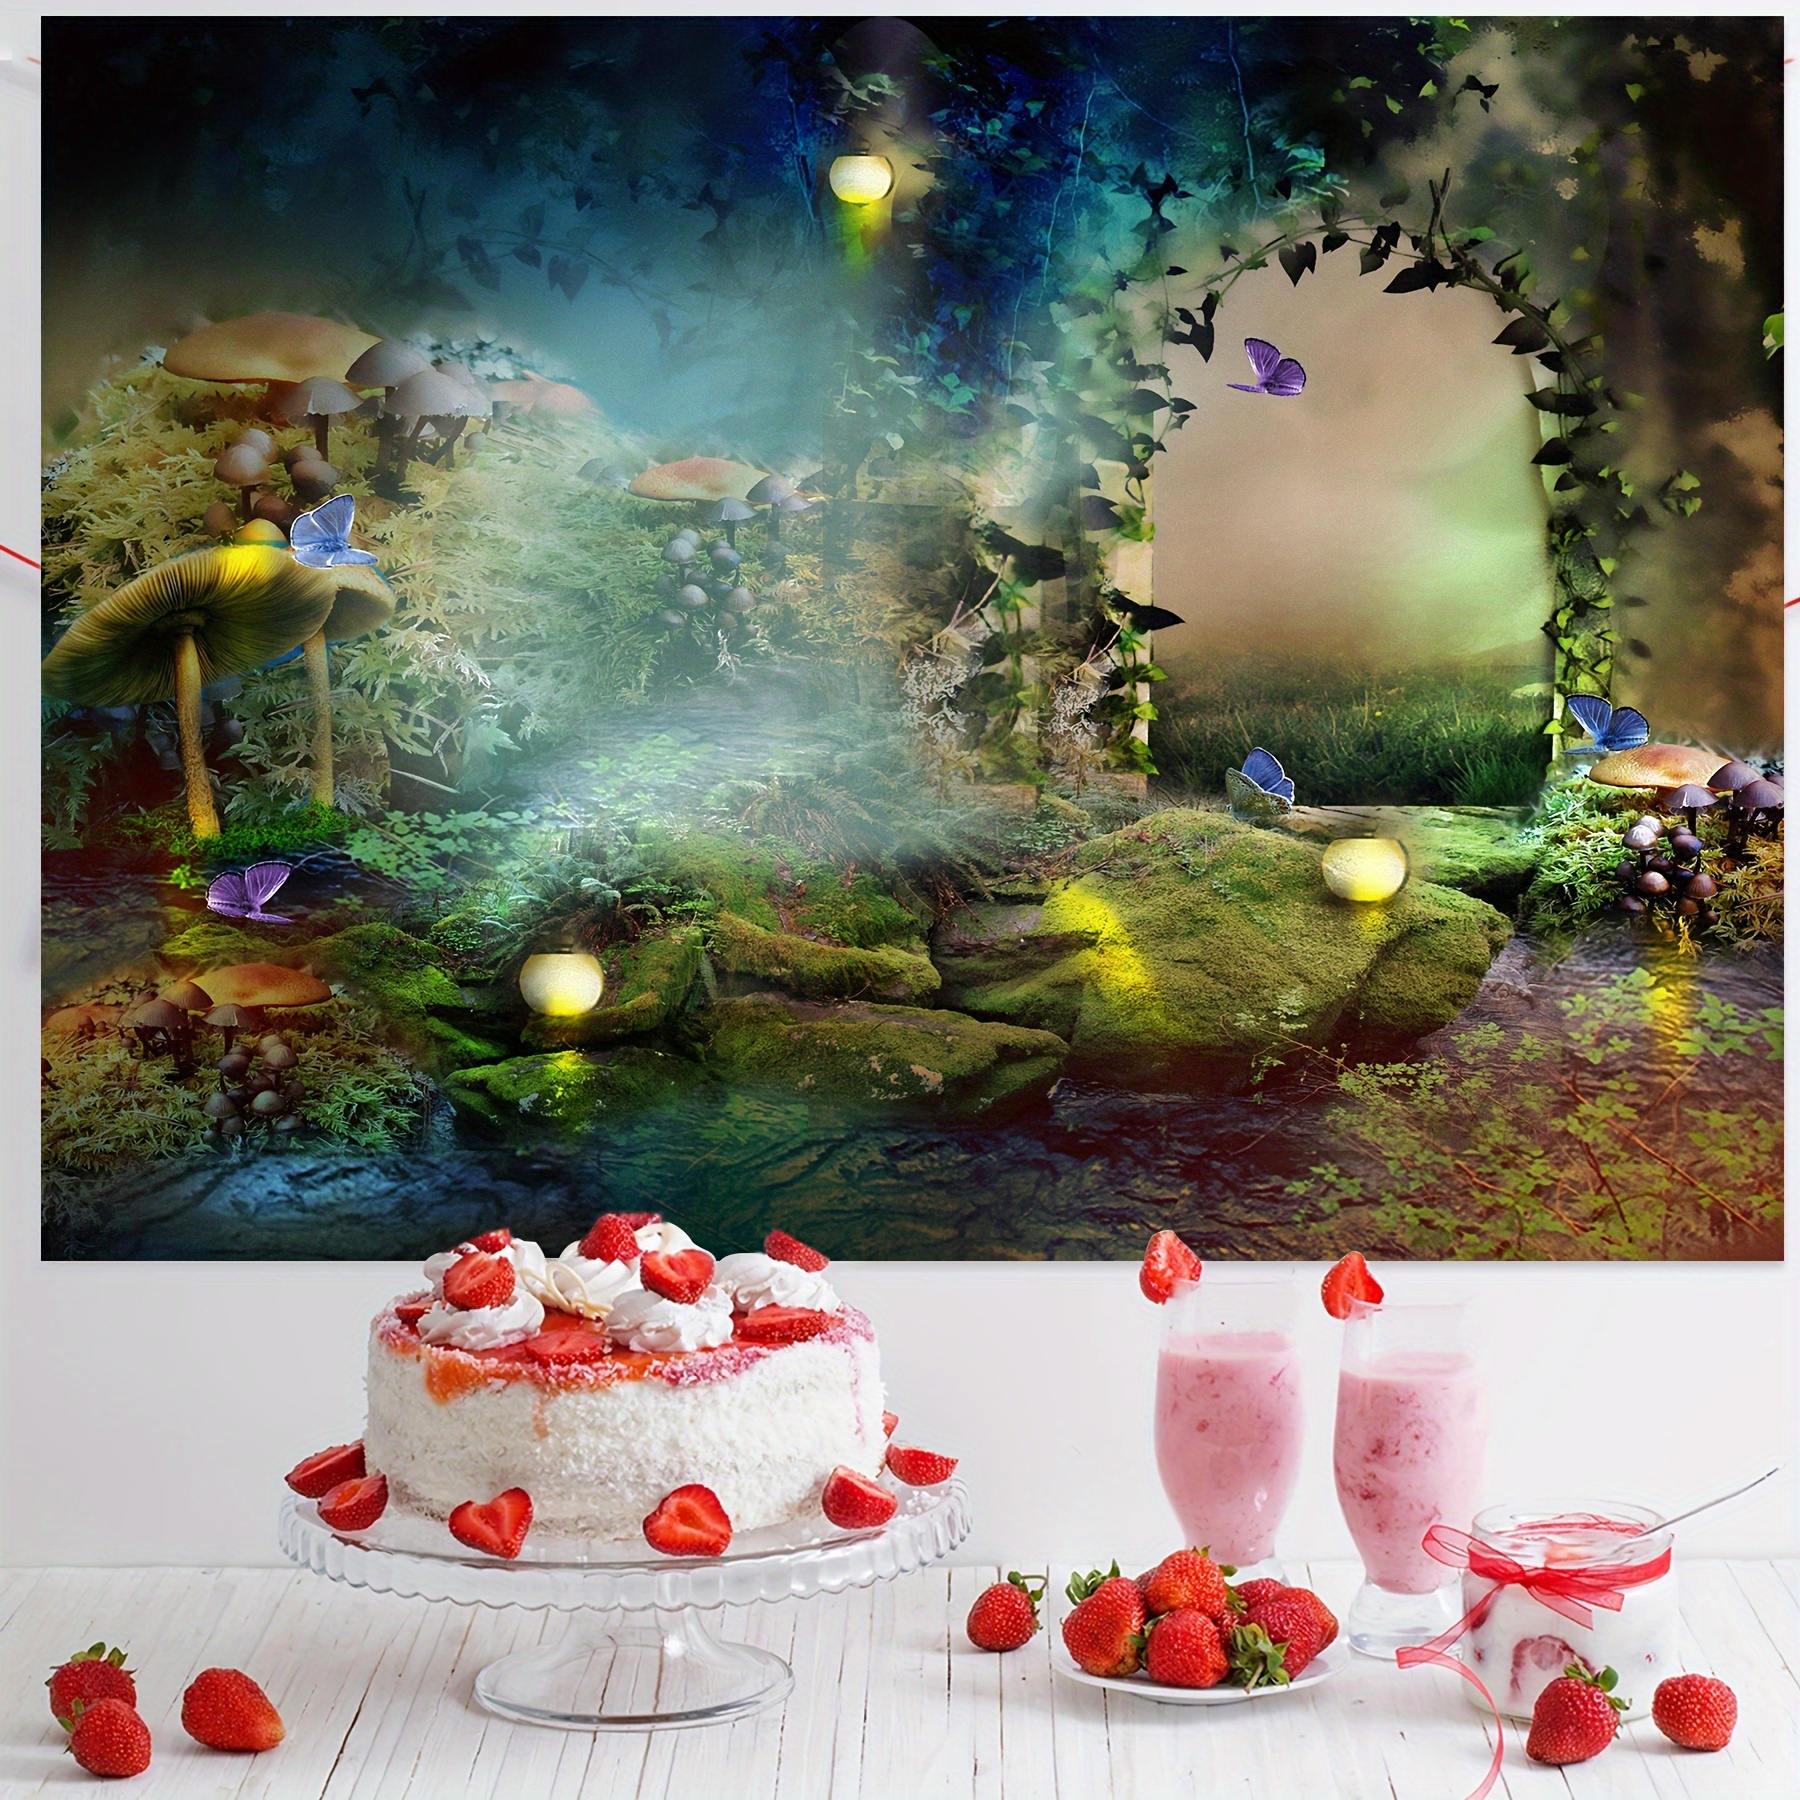 Enchanted Forest Birthday Backdrop, 1 Pcs Polyester Photography Background for Children's Boy Birthday Party Decorations, Universal Holiday Theme Without Electricity - Green Forest Secret Wonderland Banner